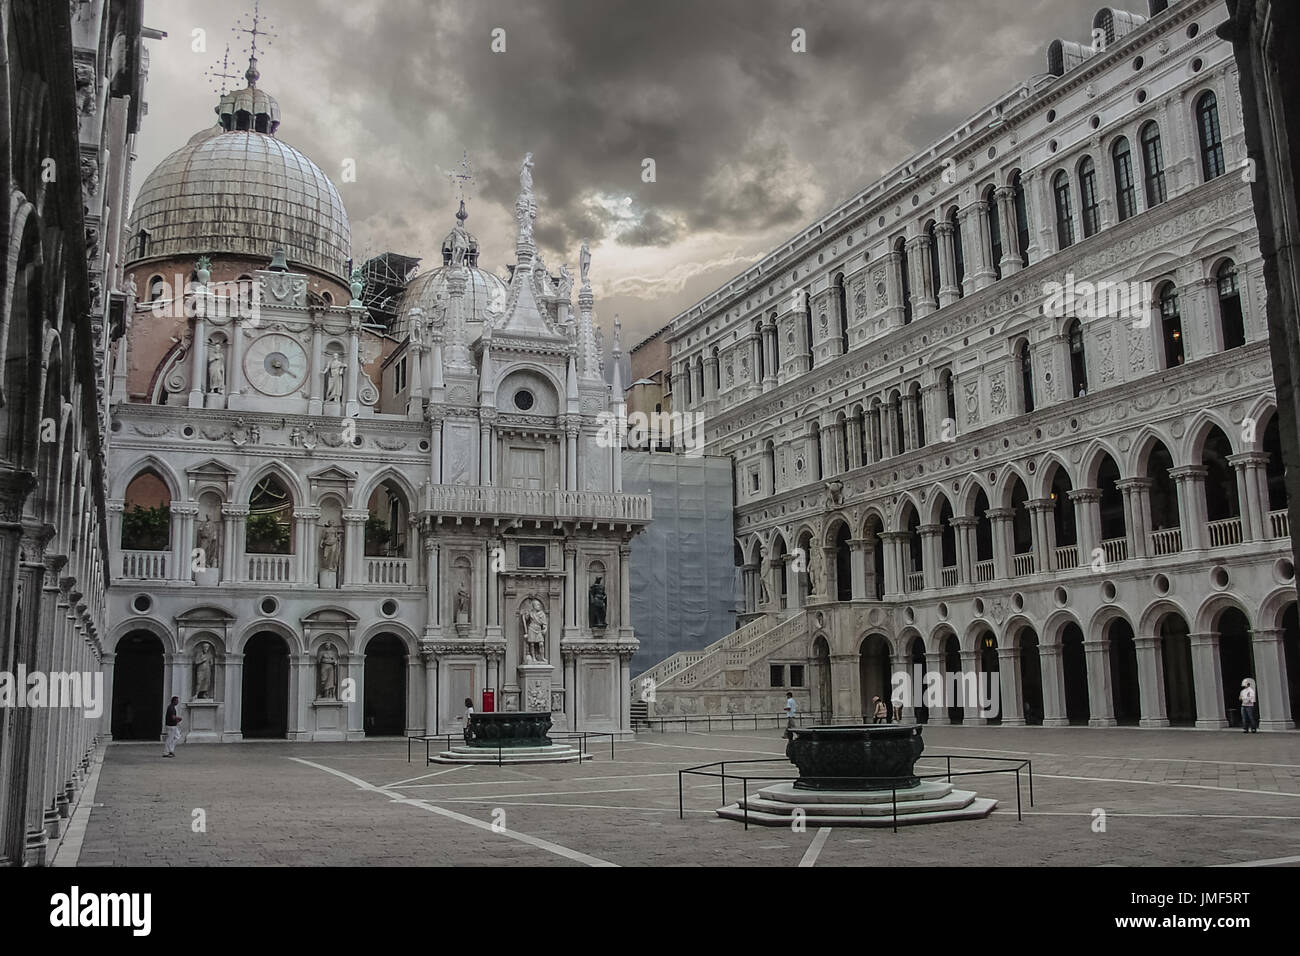 Palazzo Ducale or the Doge's Palace in Venice Italy on a dark and stormy late afternoon with gray, foreboding skies and a sinister feel to the photo Stock Photo